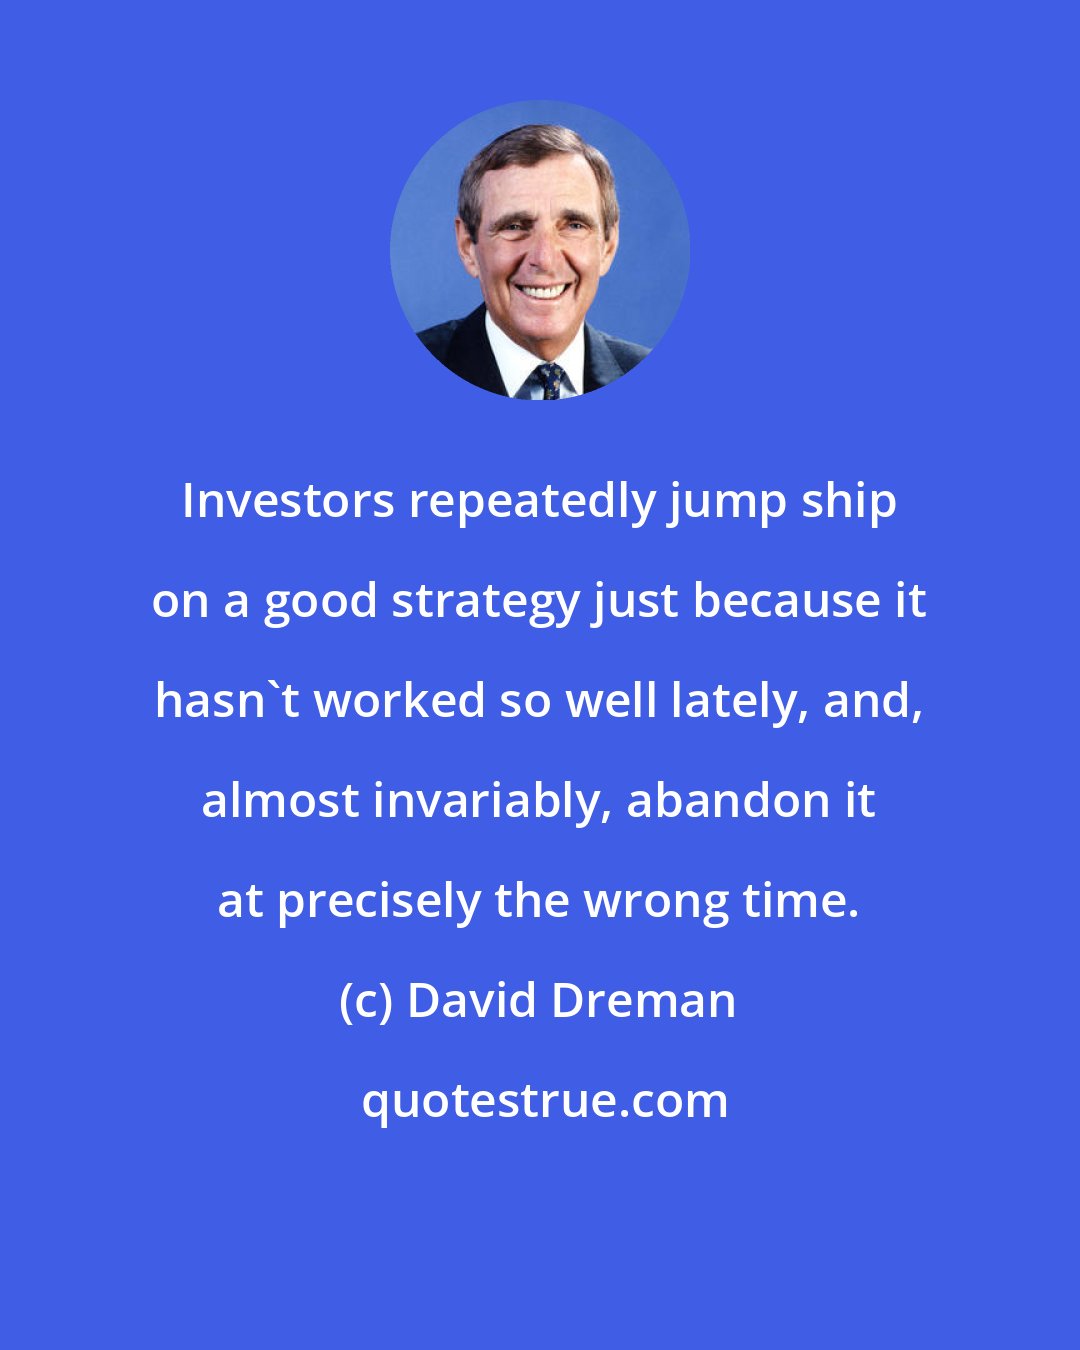 David Dreman: Investors repeatedly jump ship on a good strategy just because it hasn't worked so well lately, and, almost invariably, abandon it at precisely the wrong time.